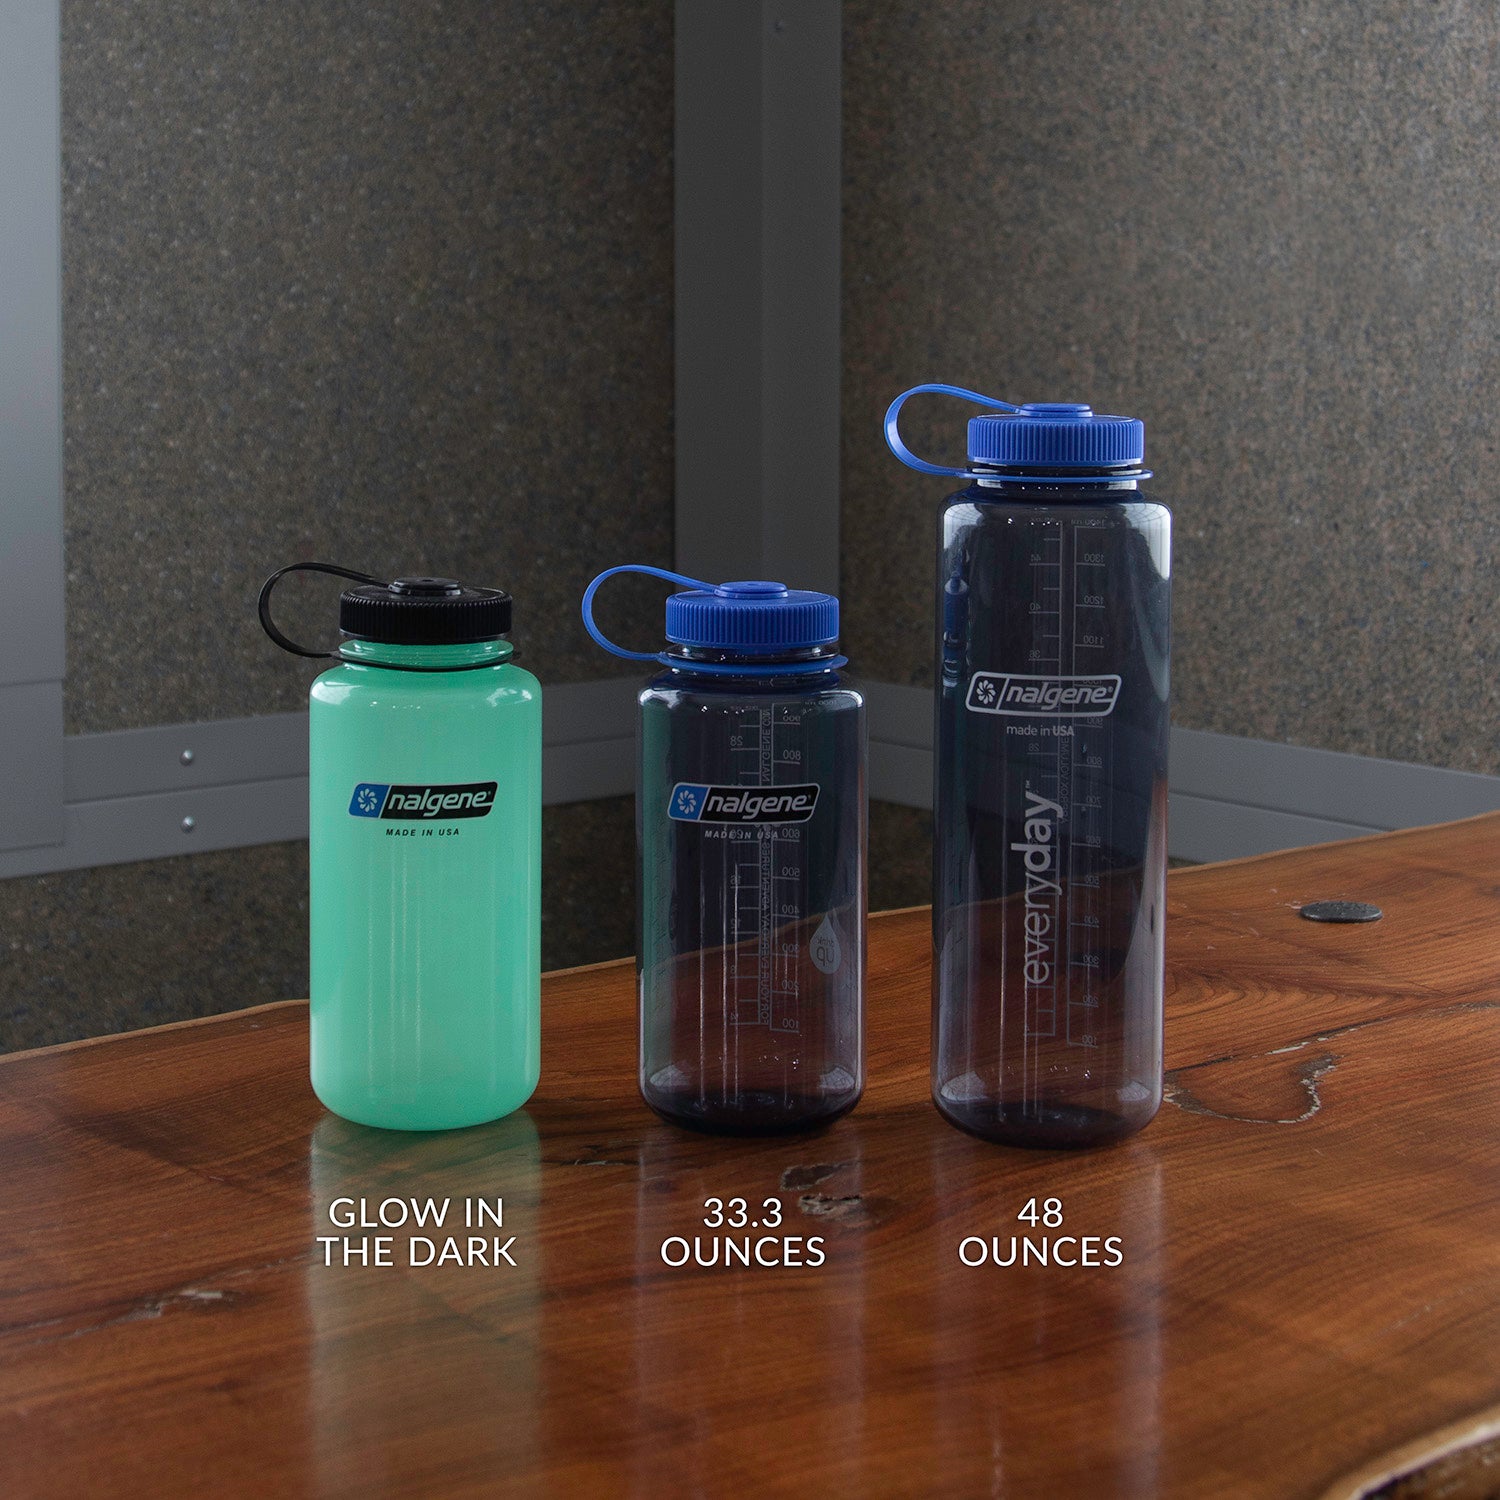 Nalgene comparison from left to right. Glow in dark, 33.3 ounce , 48 ounce. 